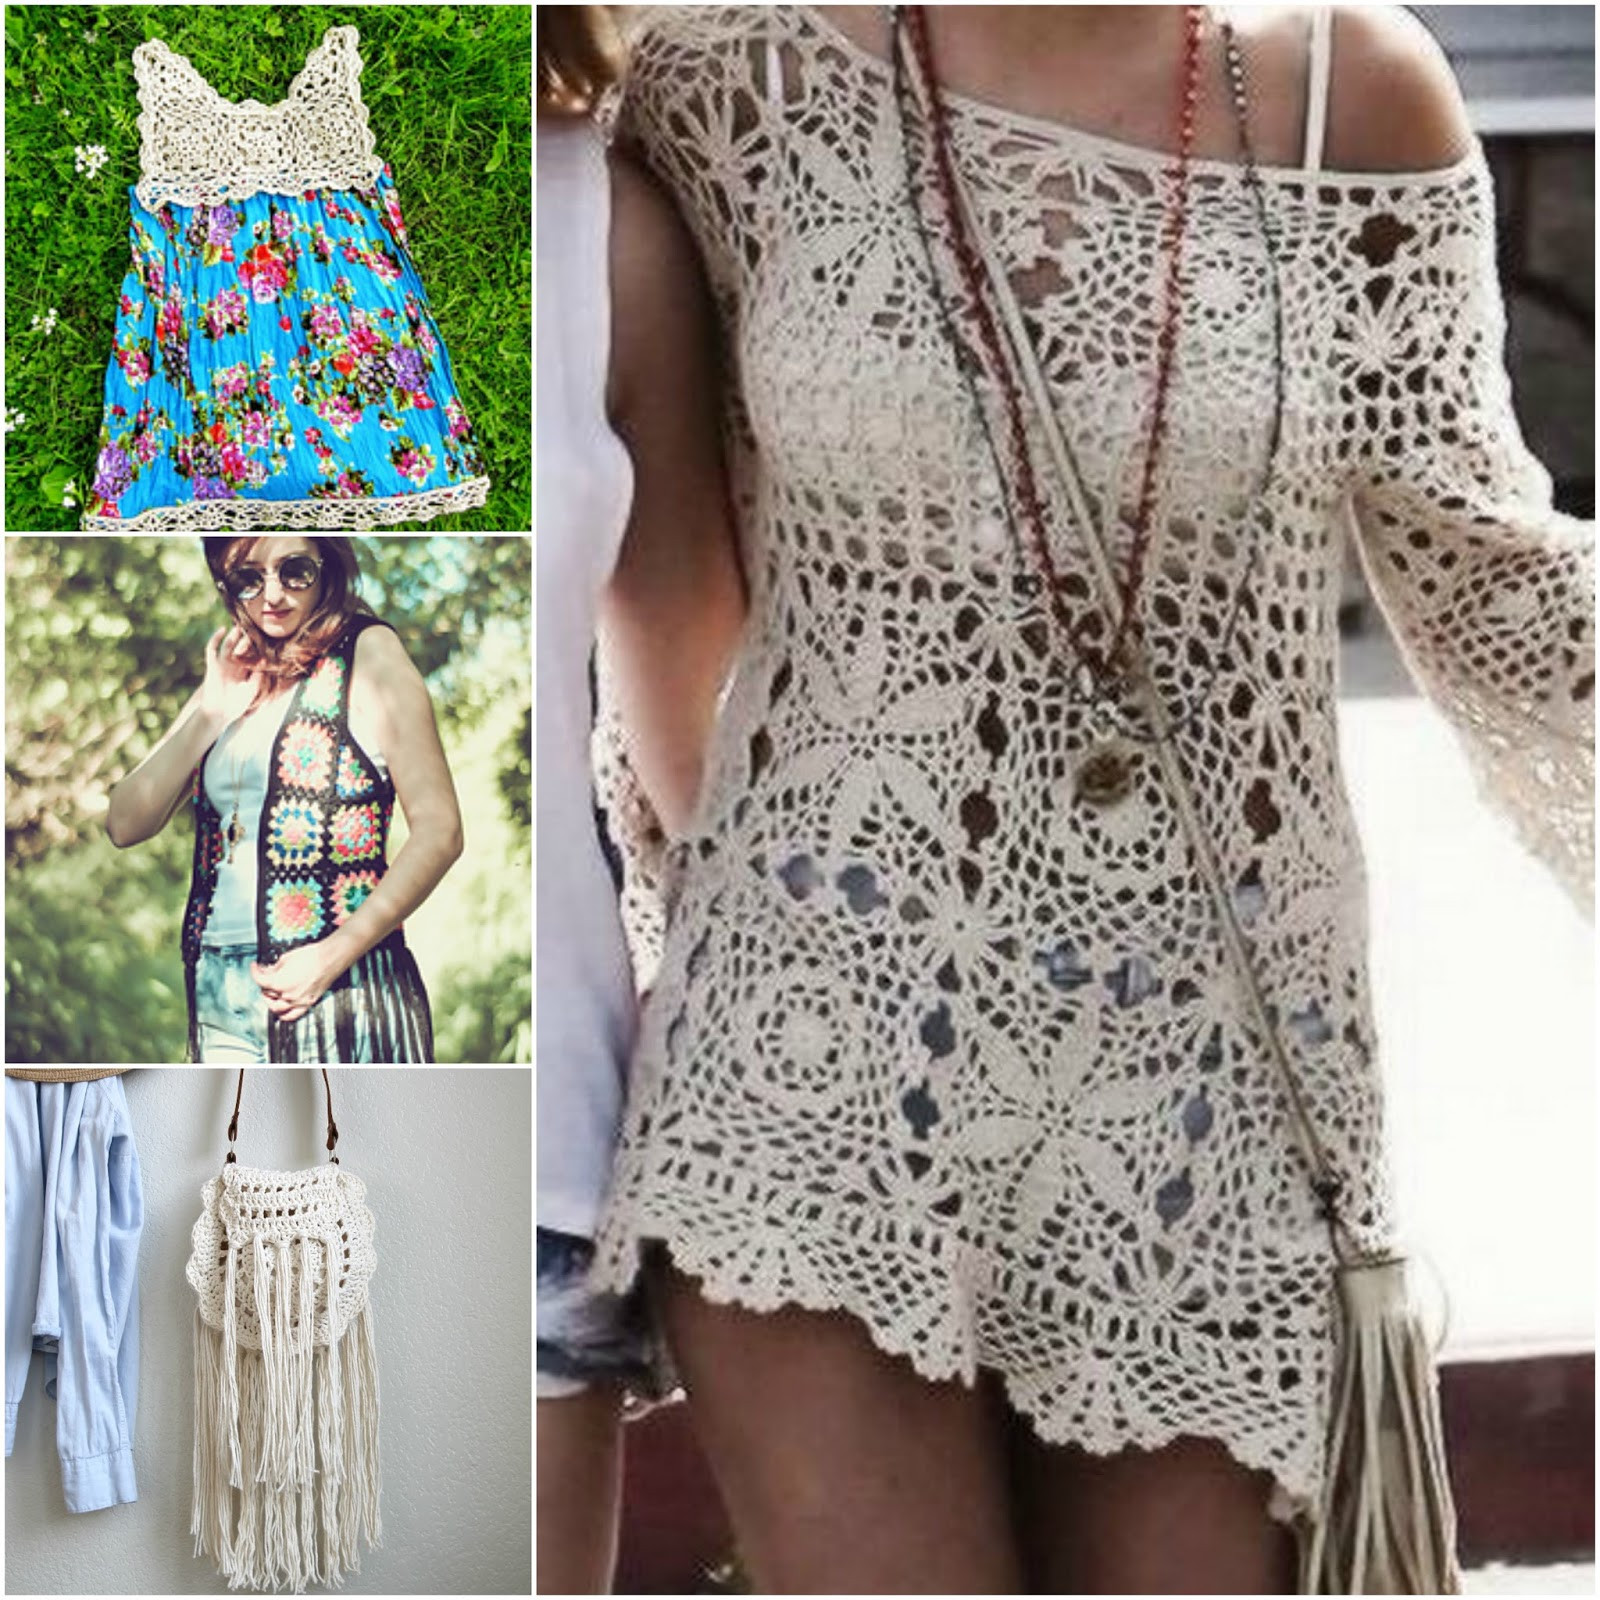 Crocheting Ideas For Summer
 The Hippy Hooker Summer Style Free Crochet Pattern Roundup